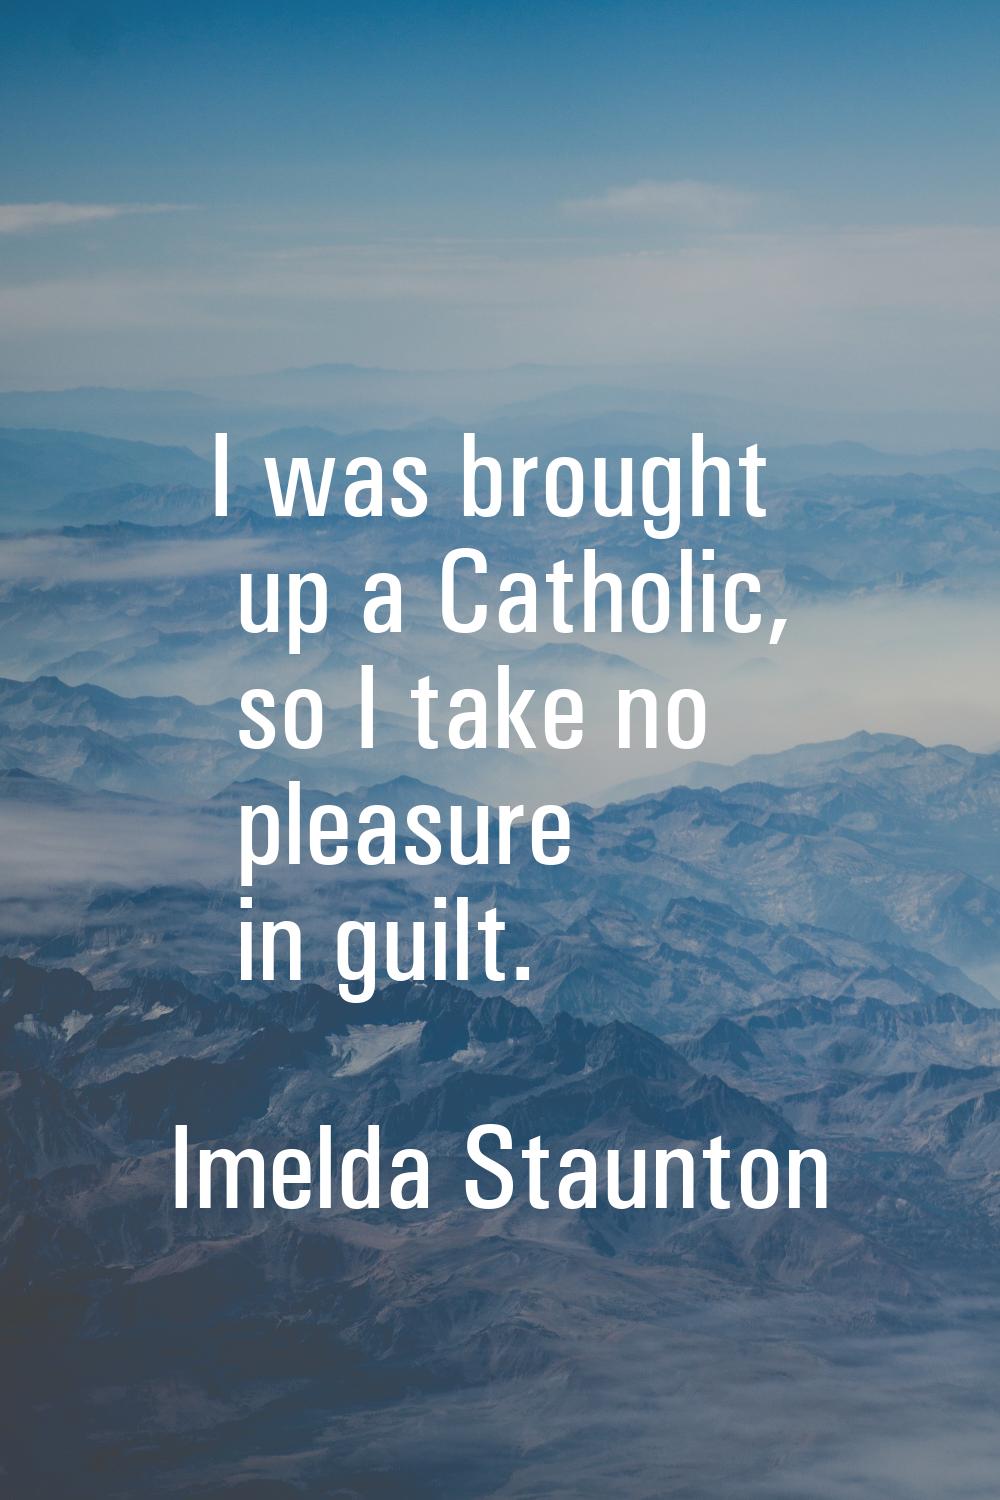 I was brought up a Catholic, so I take no pleasure in guilt.